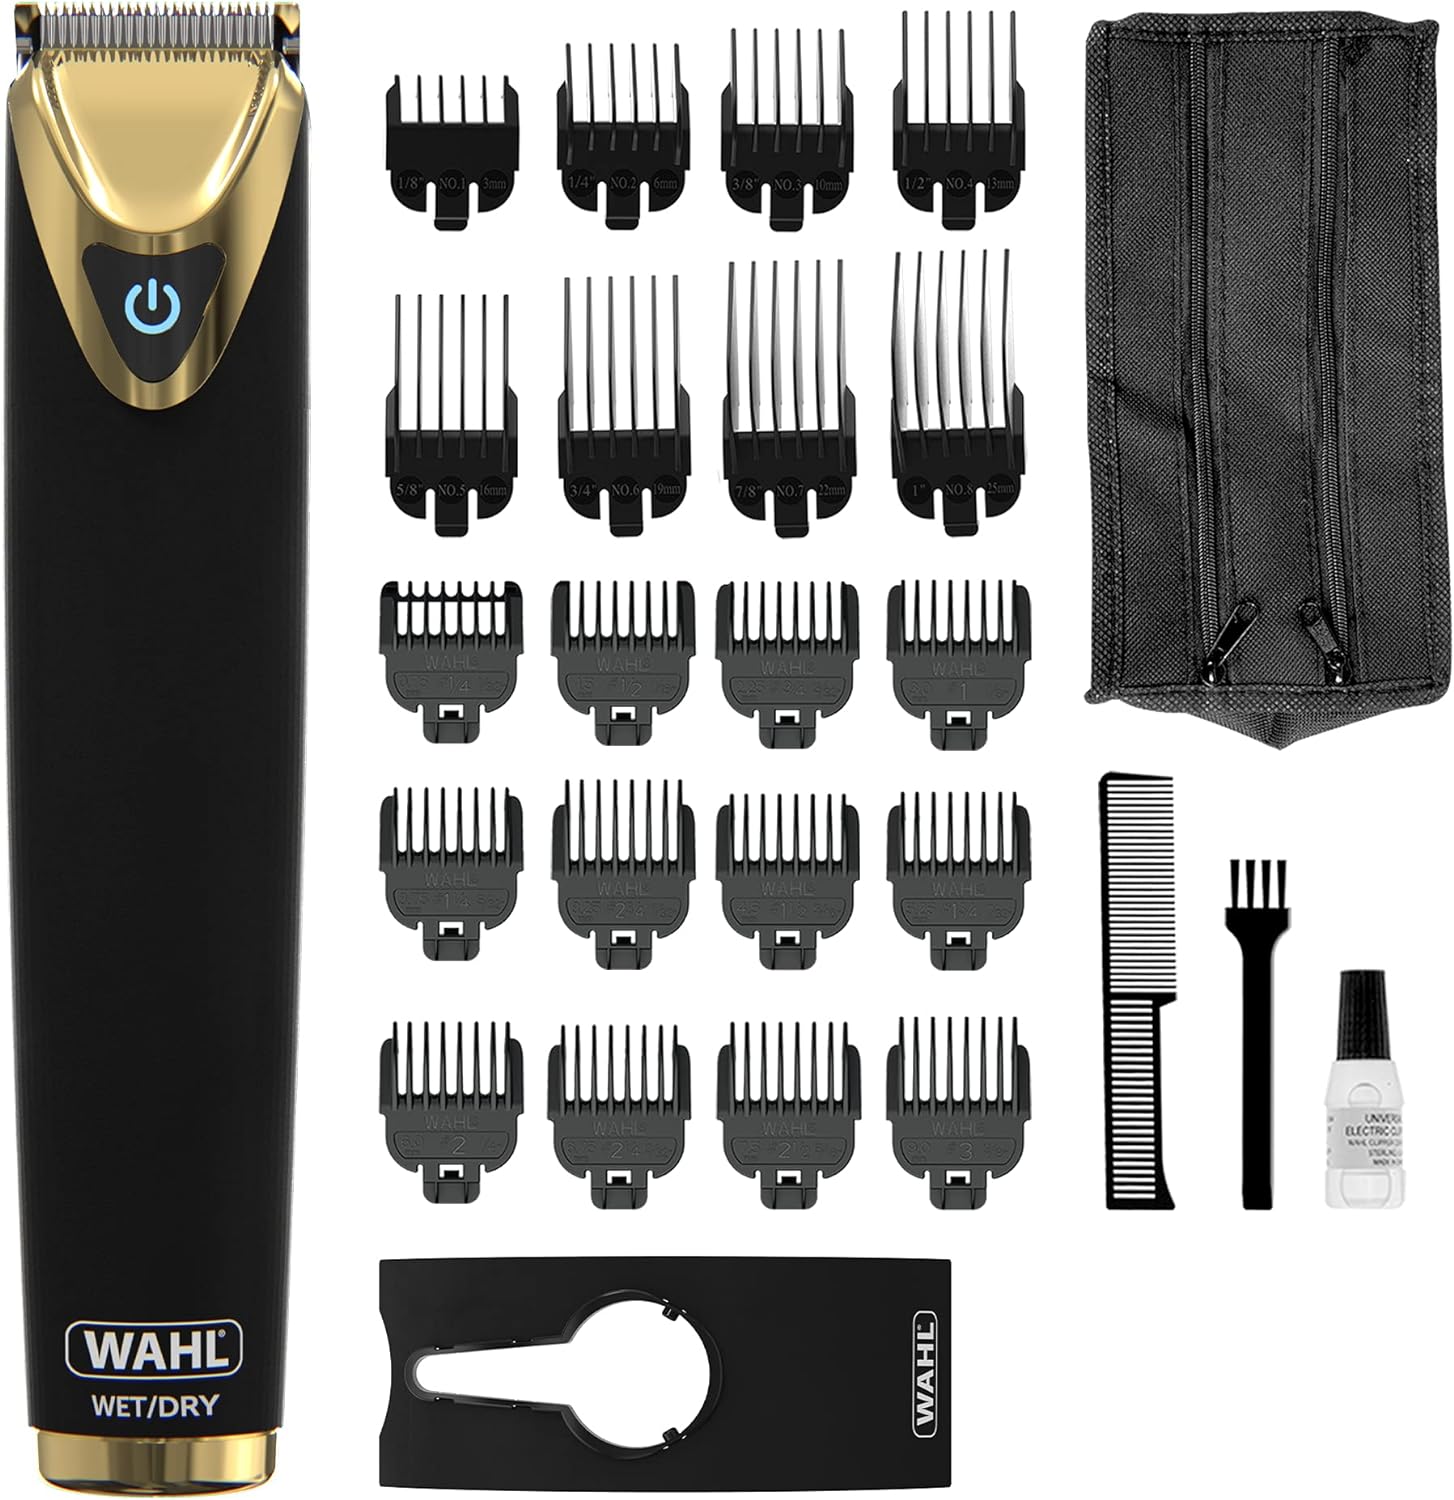 WAHL Waterproof Beard Trimmer Men, Real Stainless Steel, Advanced Lithium power Hair Trimmers for Men, Stubble Trimmer, Male Grooming Set, Washable Head, Black and Gold